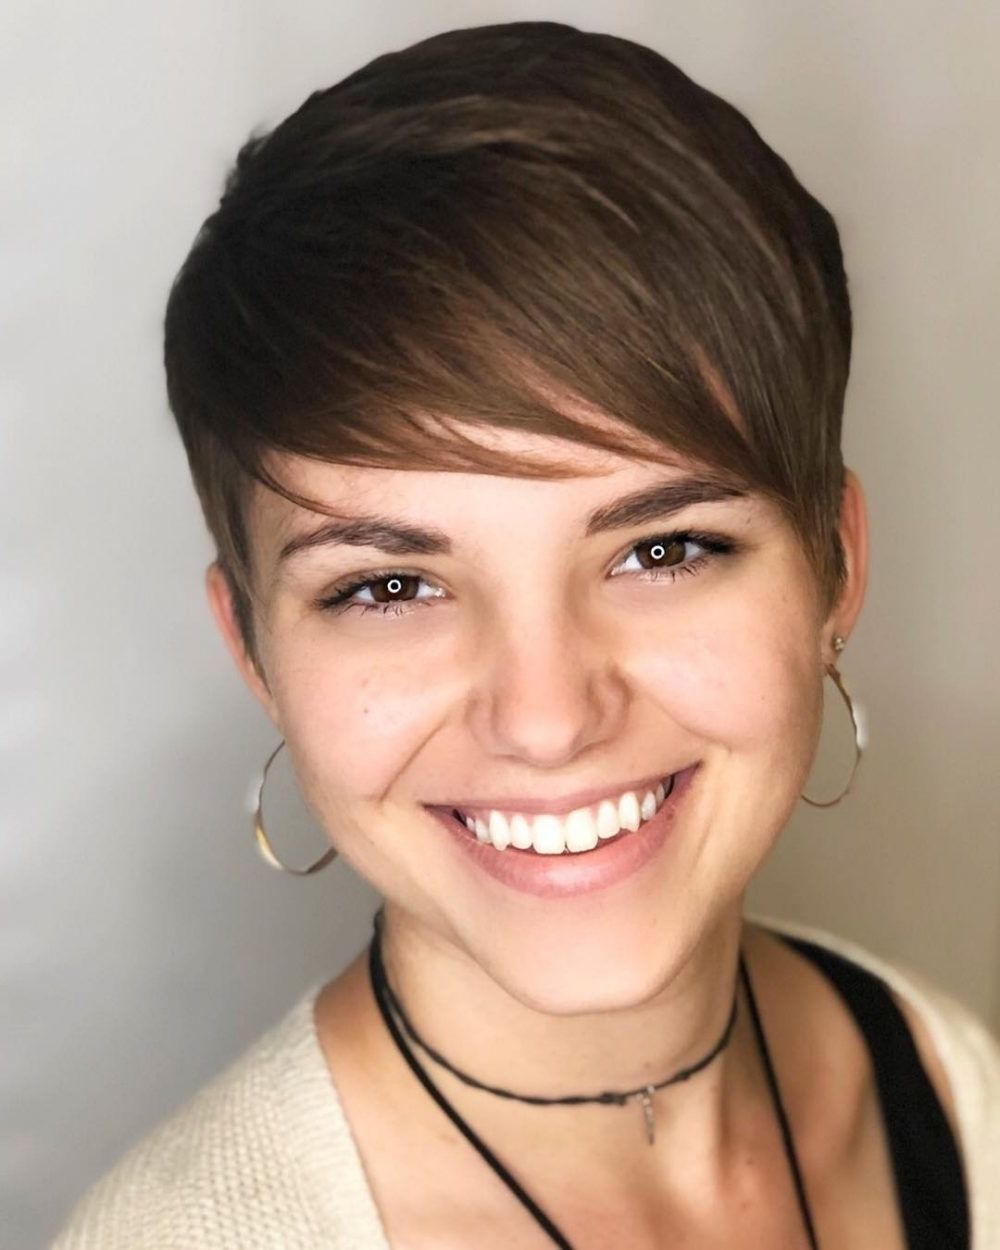 33 Flattering Short Hairstyles For Round Faces In 2018 With Trendy Short Choppy Side Parted Pixie Hairstyles (View 7 of 20)